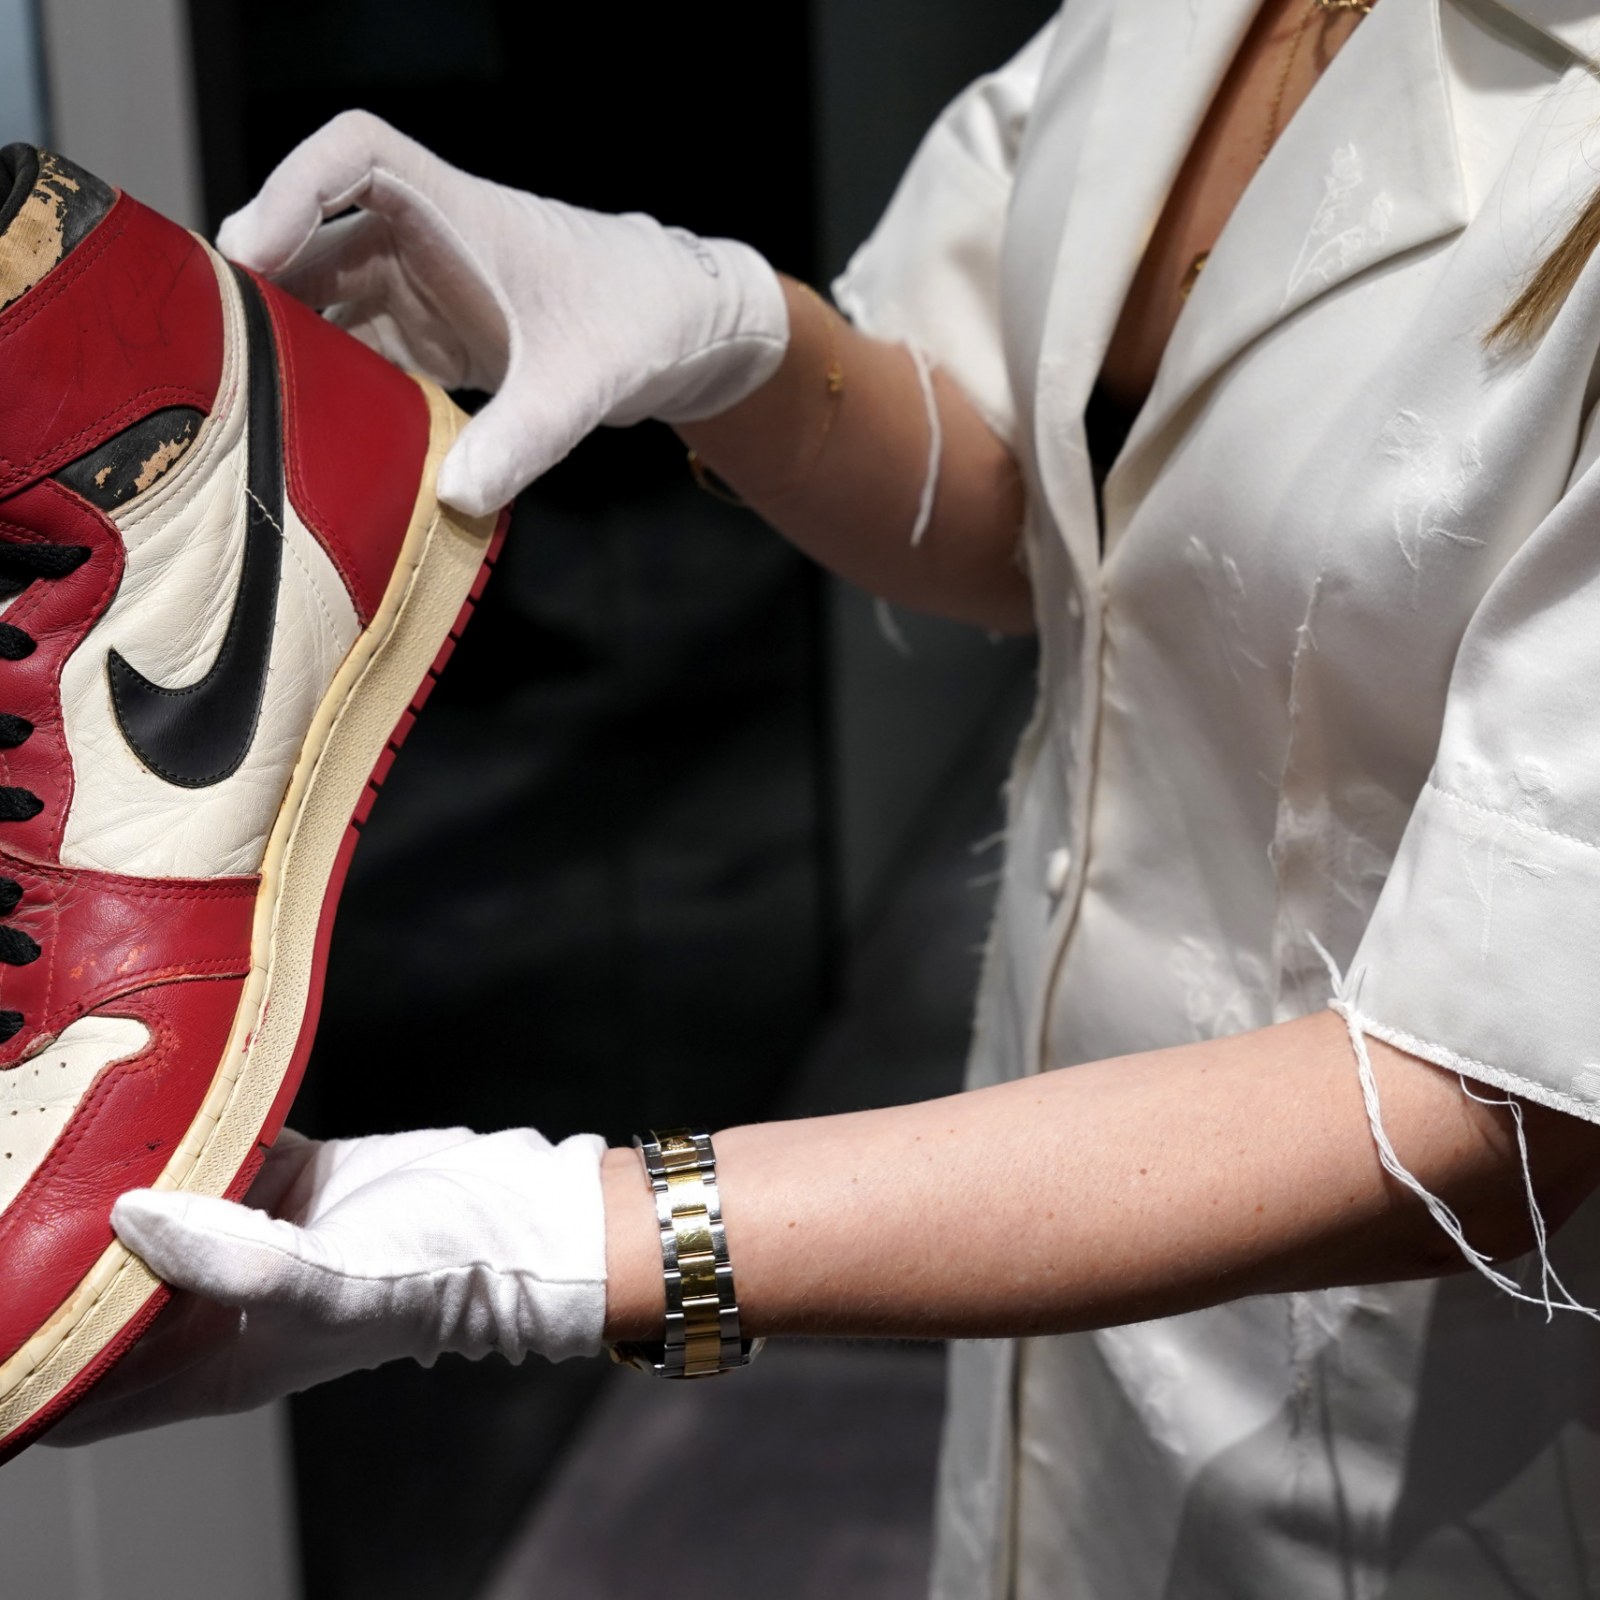 The Most Expensive Air Jordans Of All Time